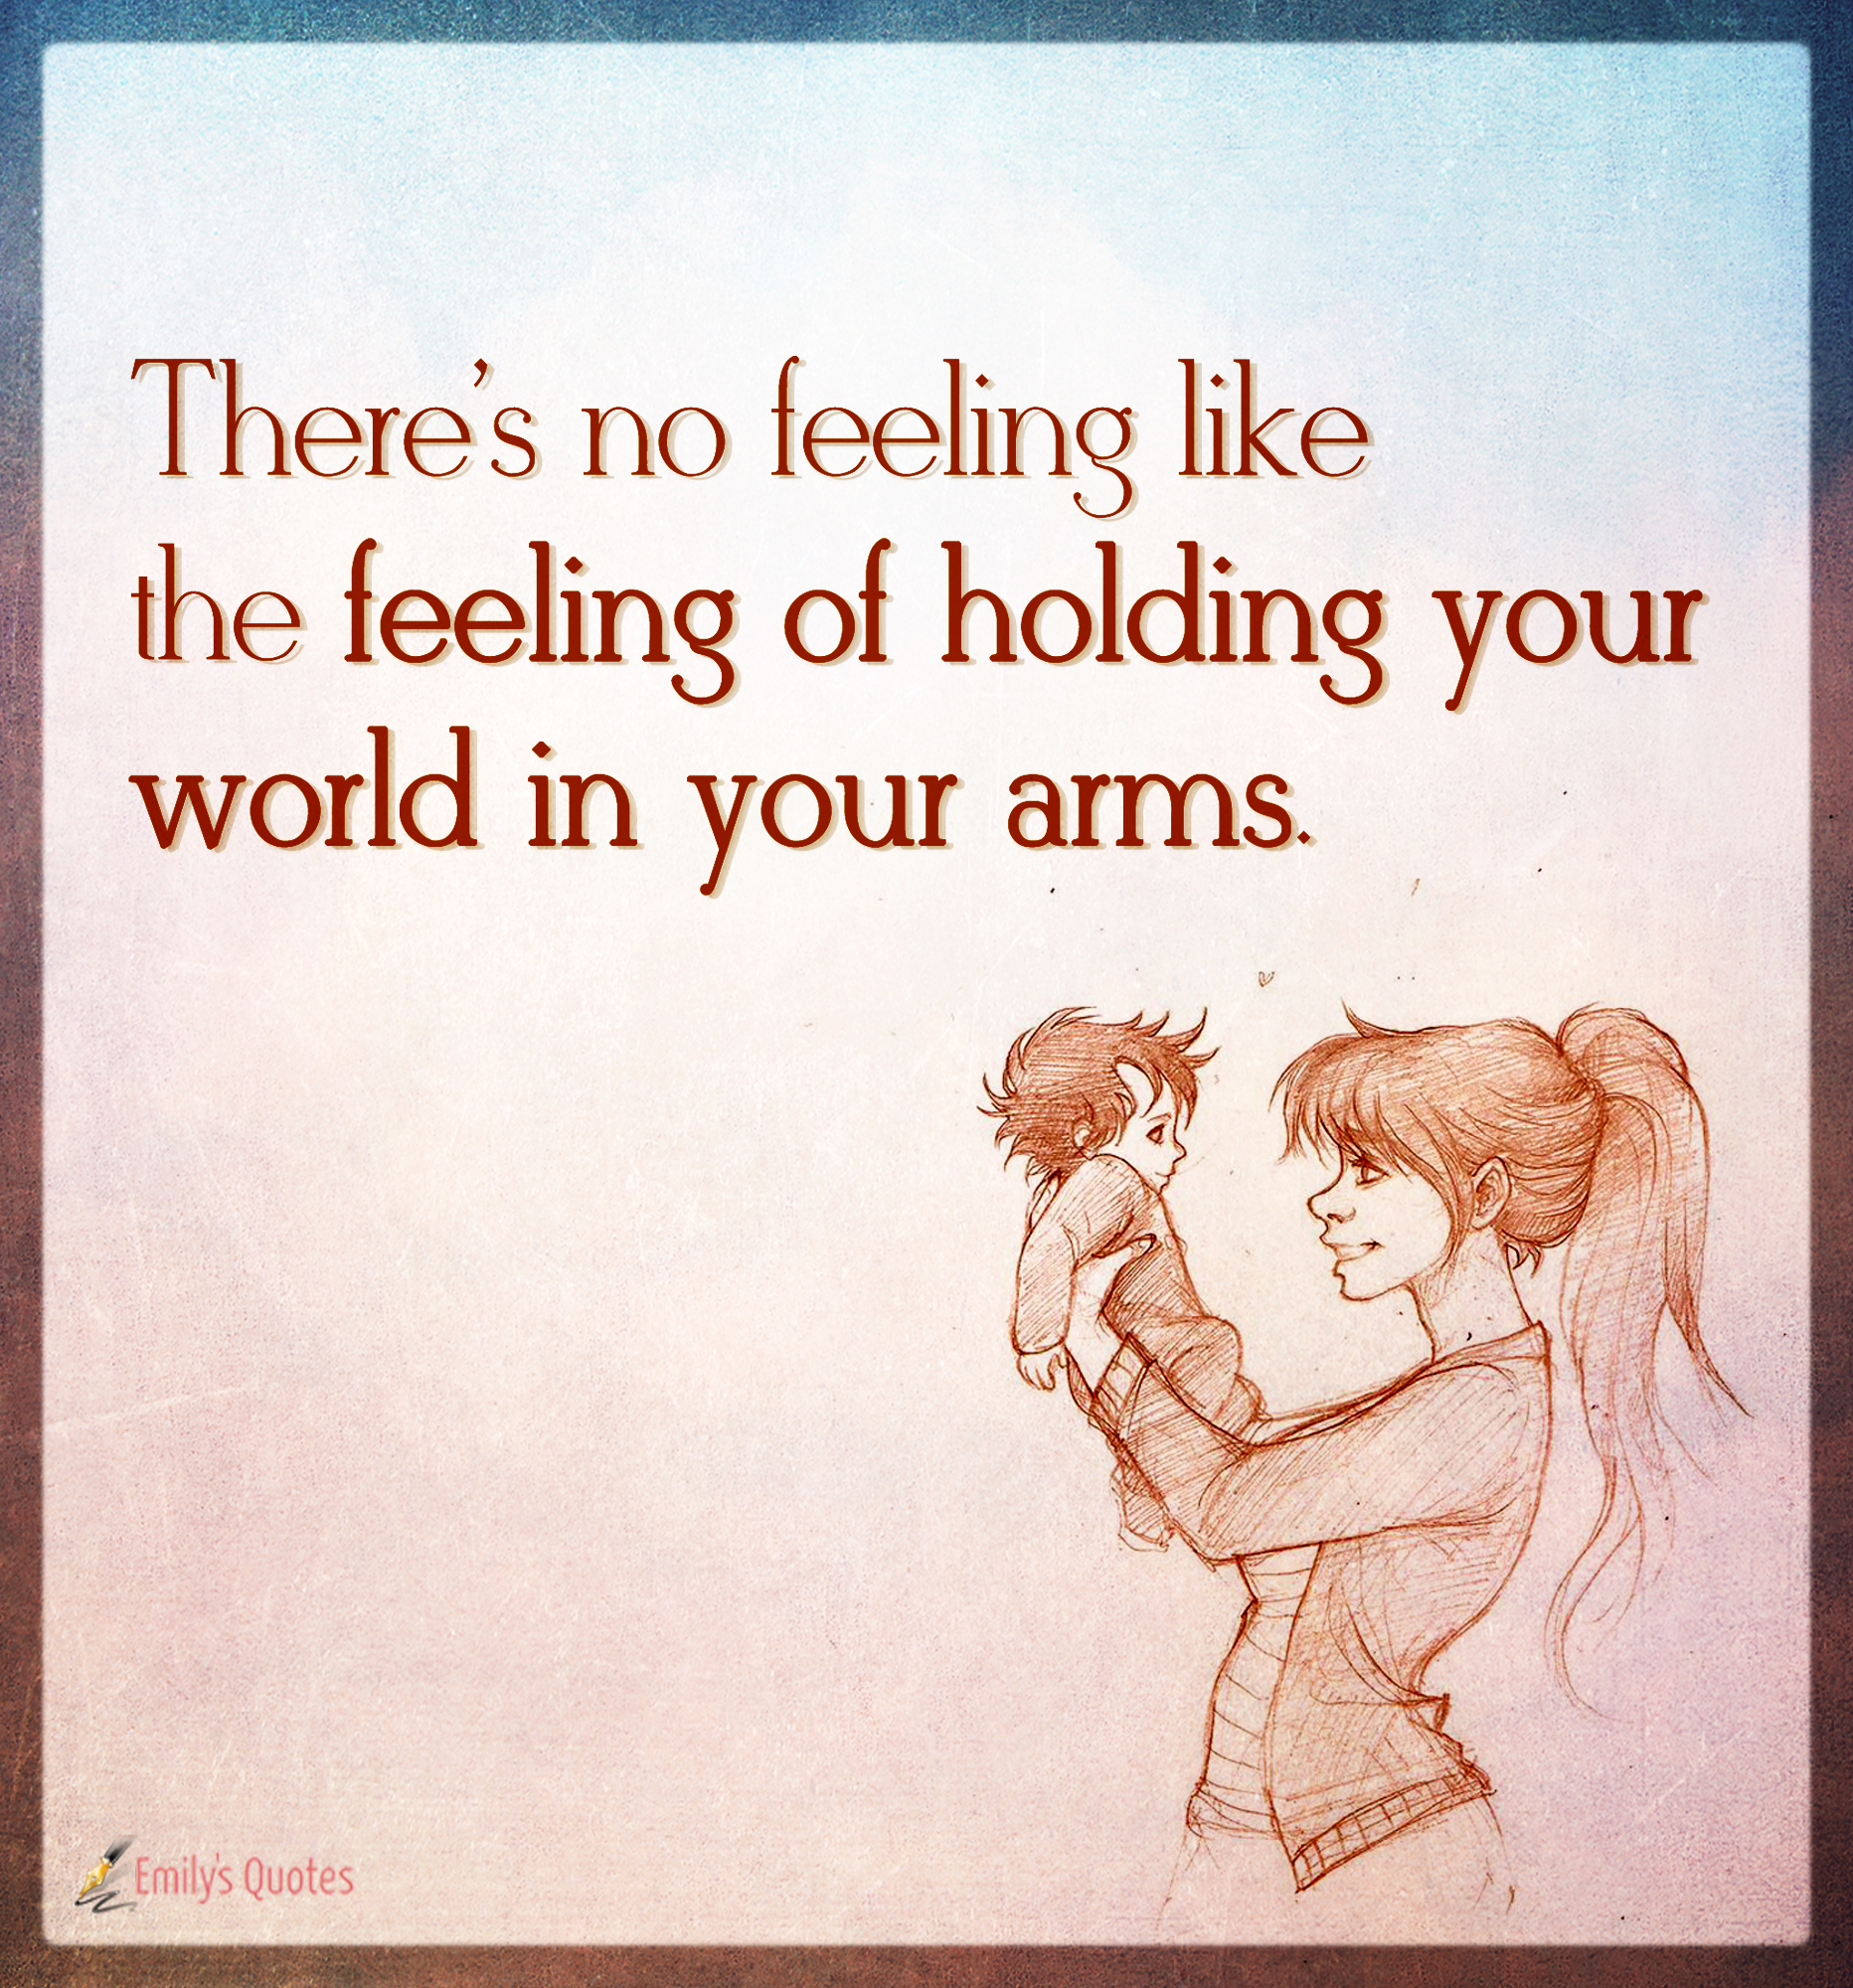 There’s no feeling like the feeling of holding your world in your arms